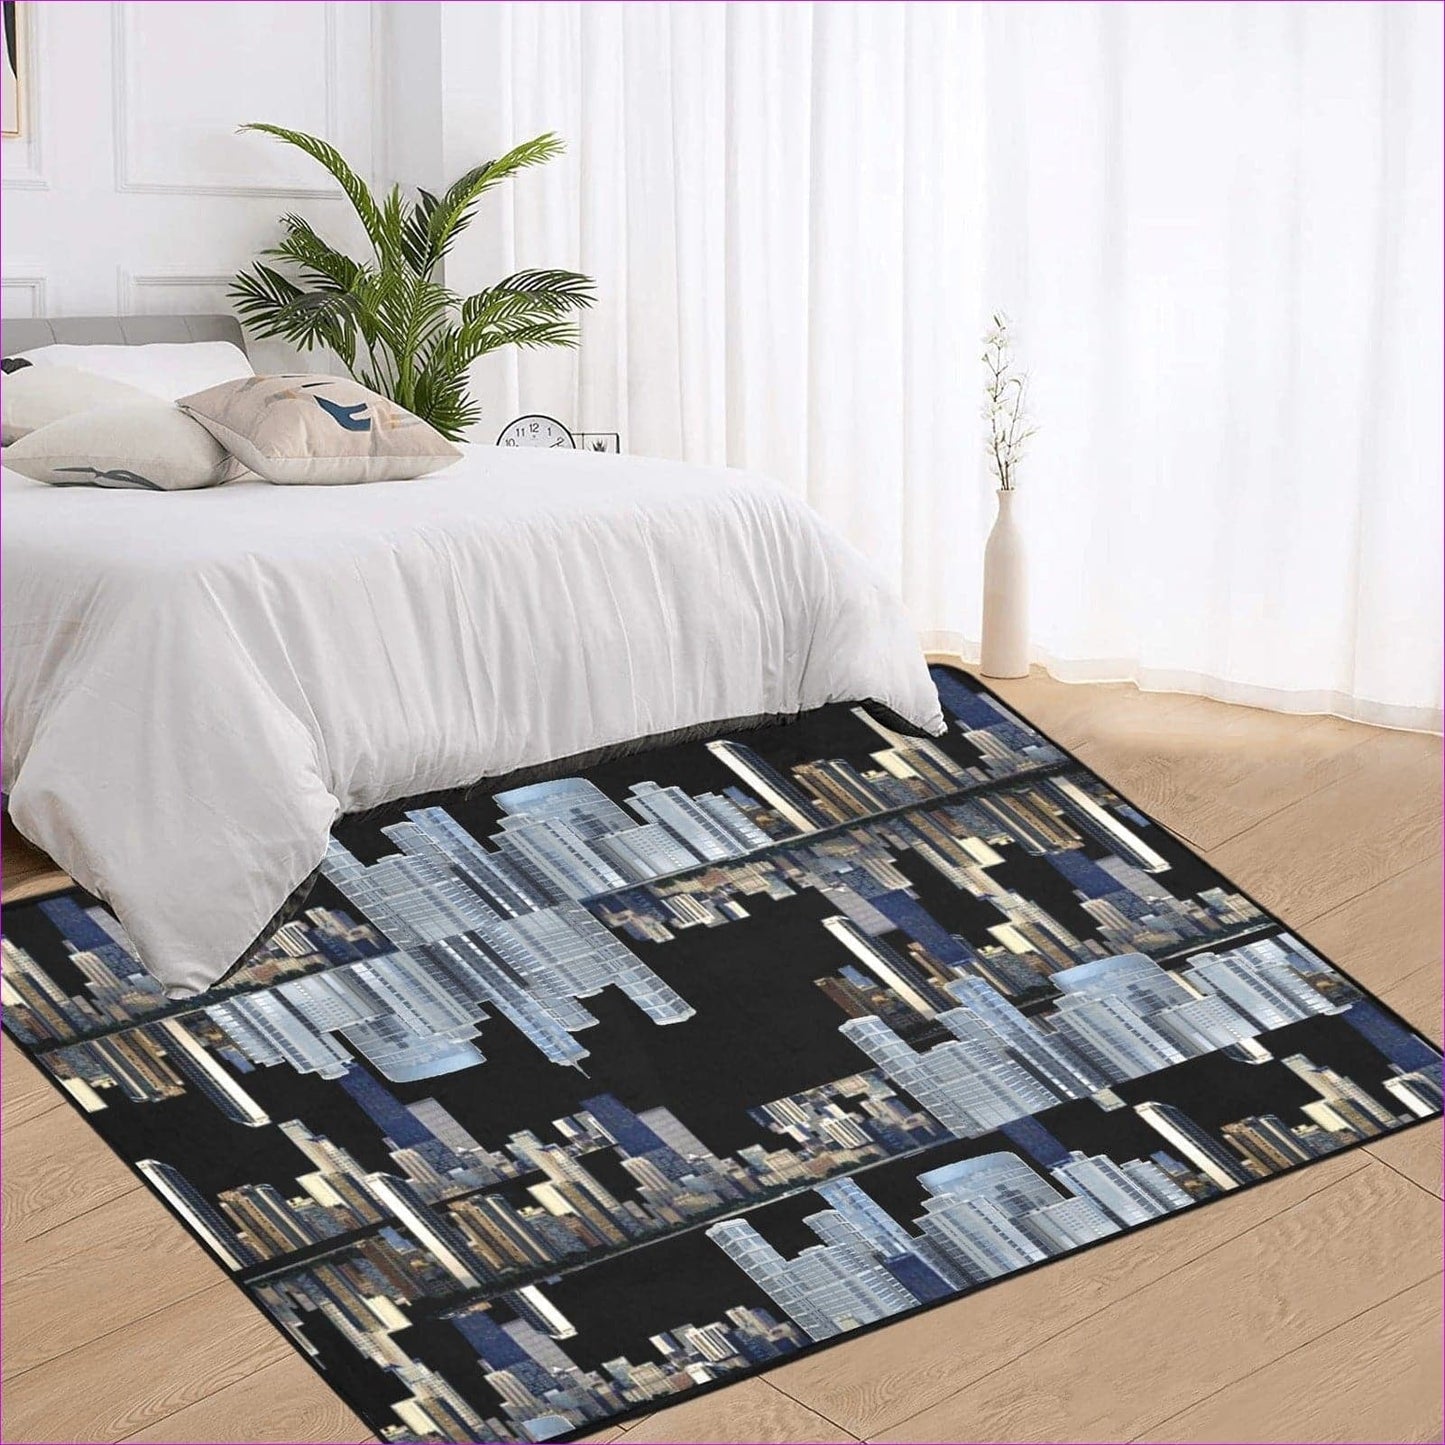 One Size city doubled -gray Area Rug with Black Binding 7'x5' City Blocks Area Rug (4 colors) - area rug at TFC&H Co.